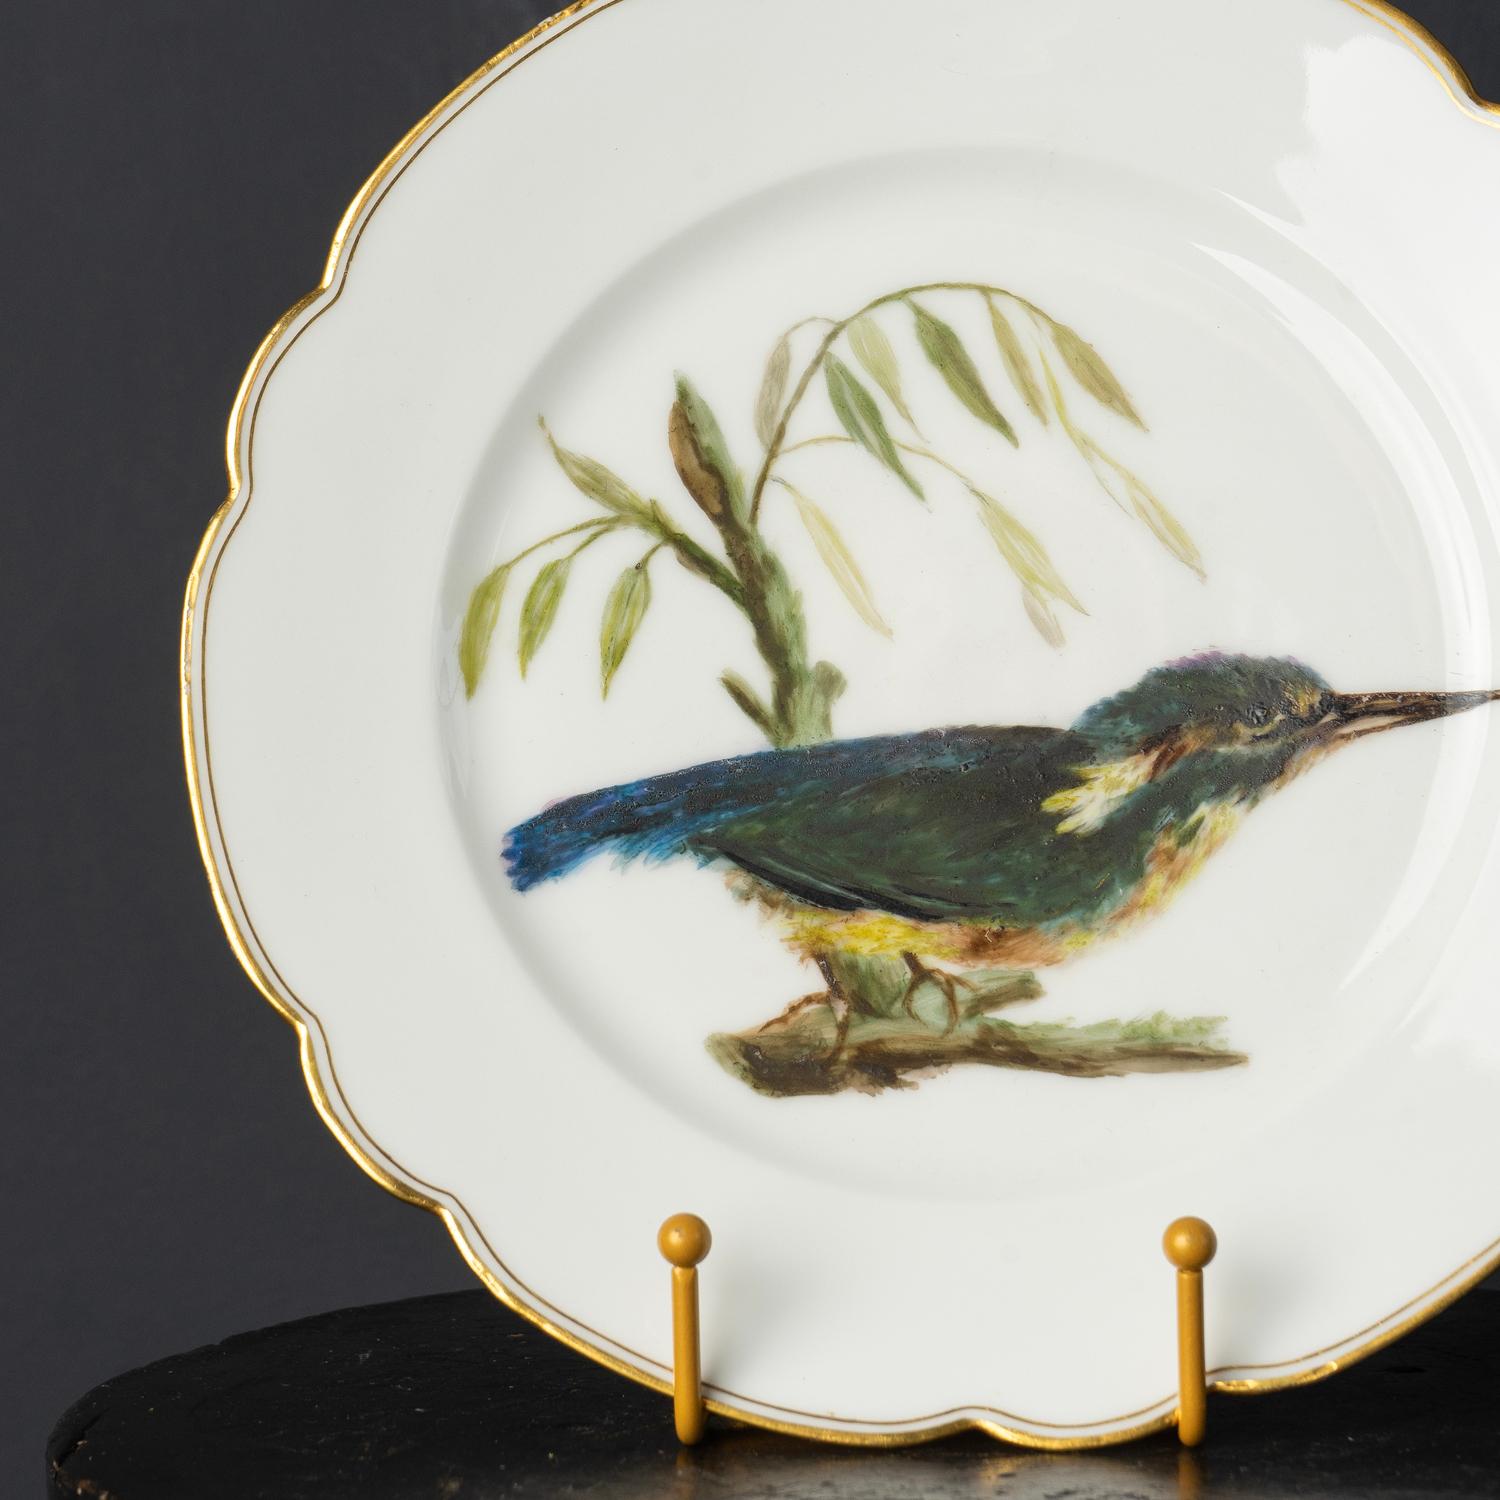 Antique French Hand-Painted Kingfisher Porcelain Plate, 19th Century For Sale 2